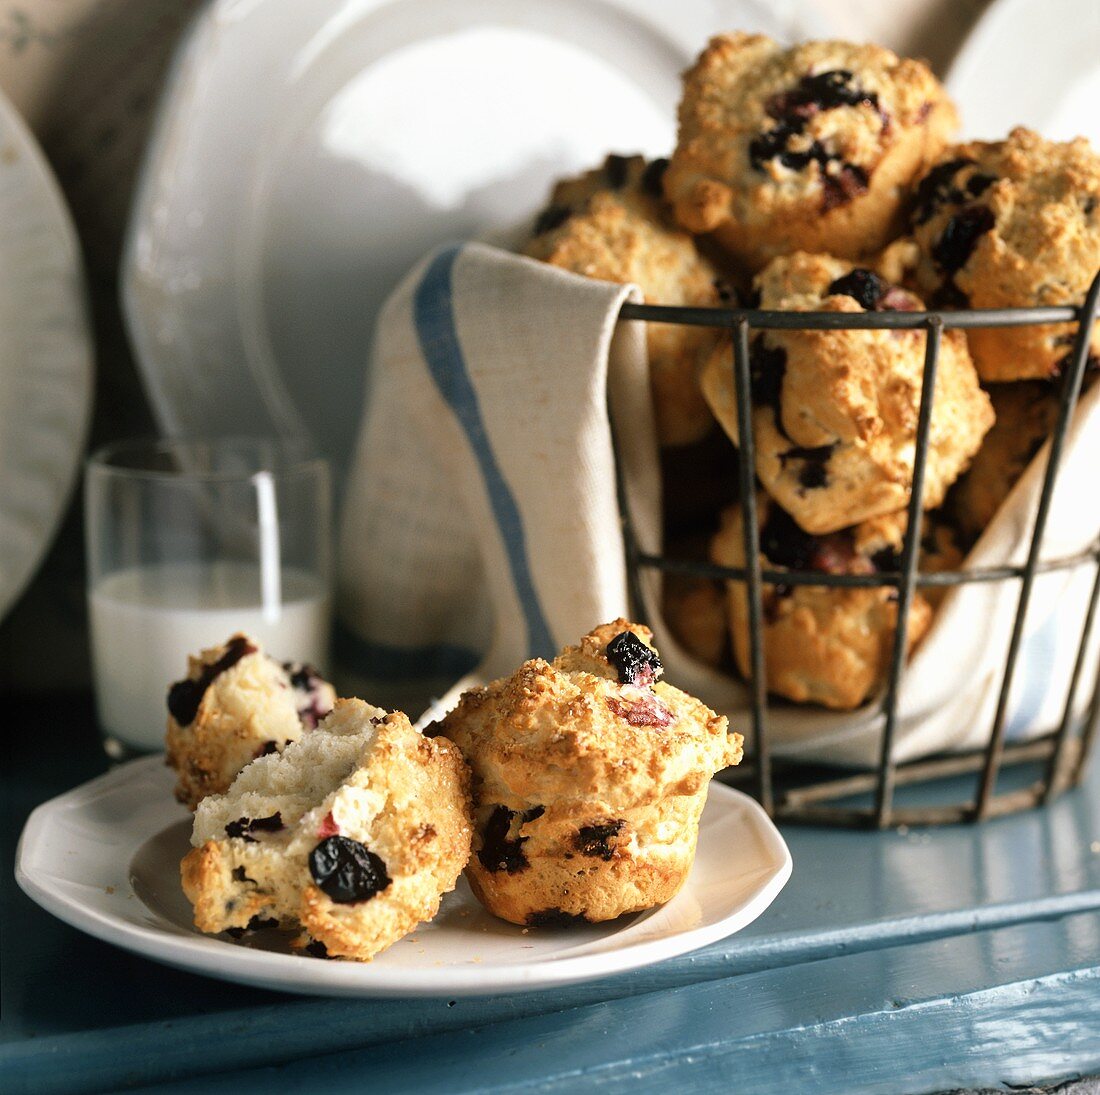 Blueberry Muffins in a Wire Basket and on a Plate with a Glass of Milk